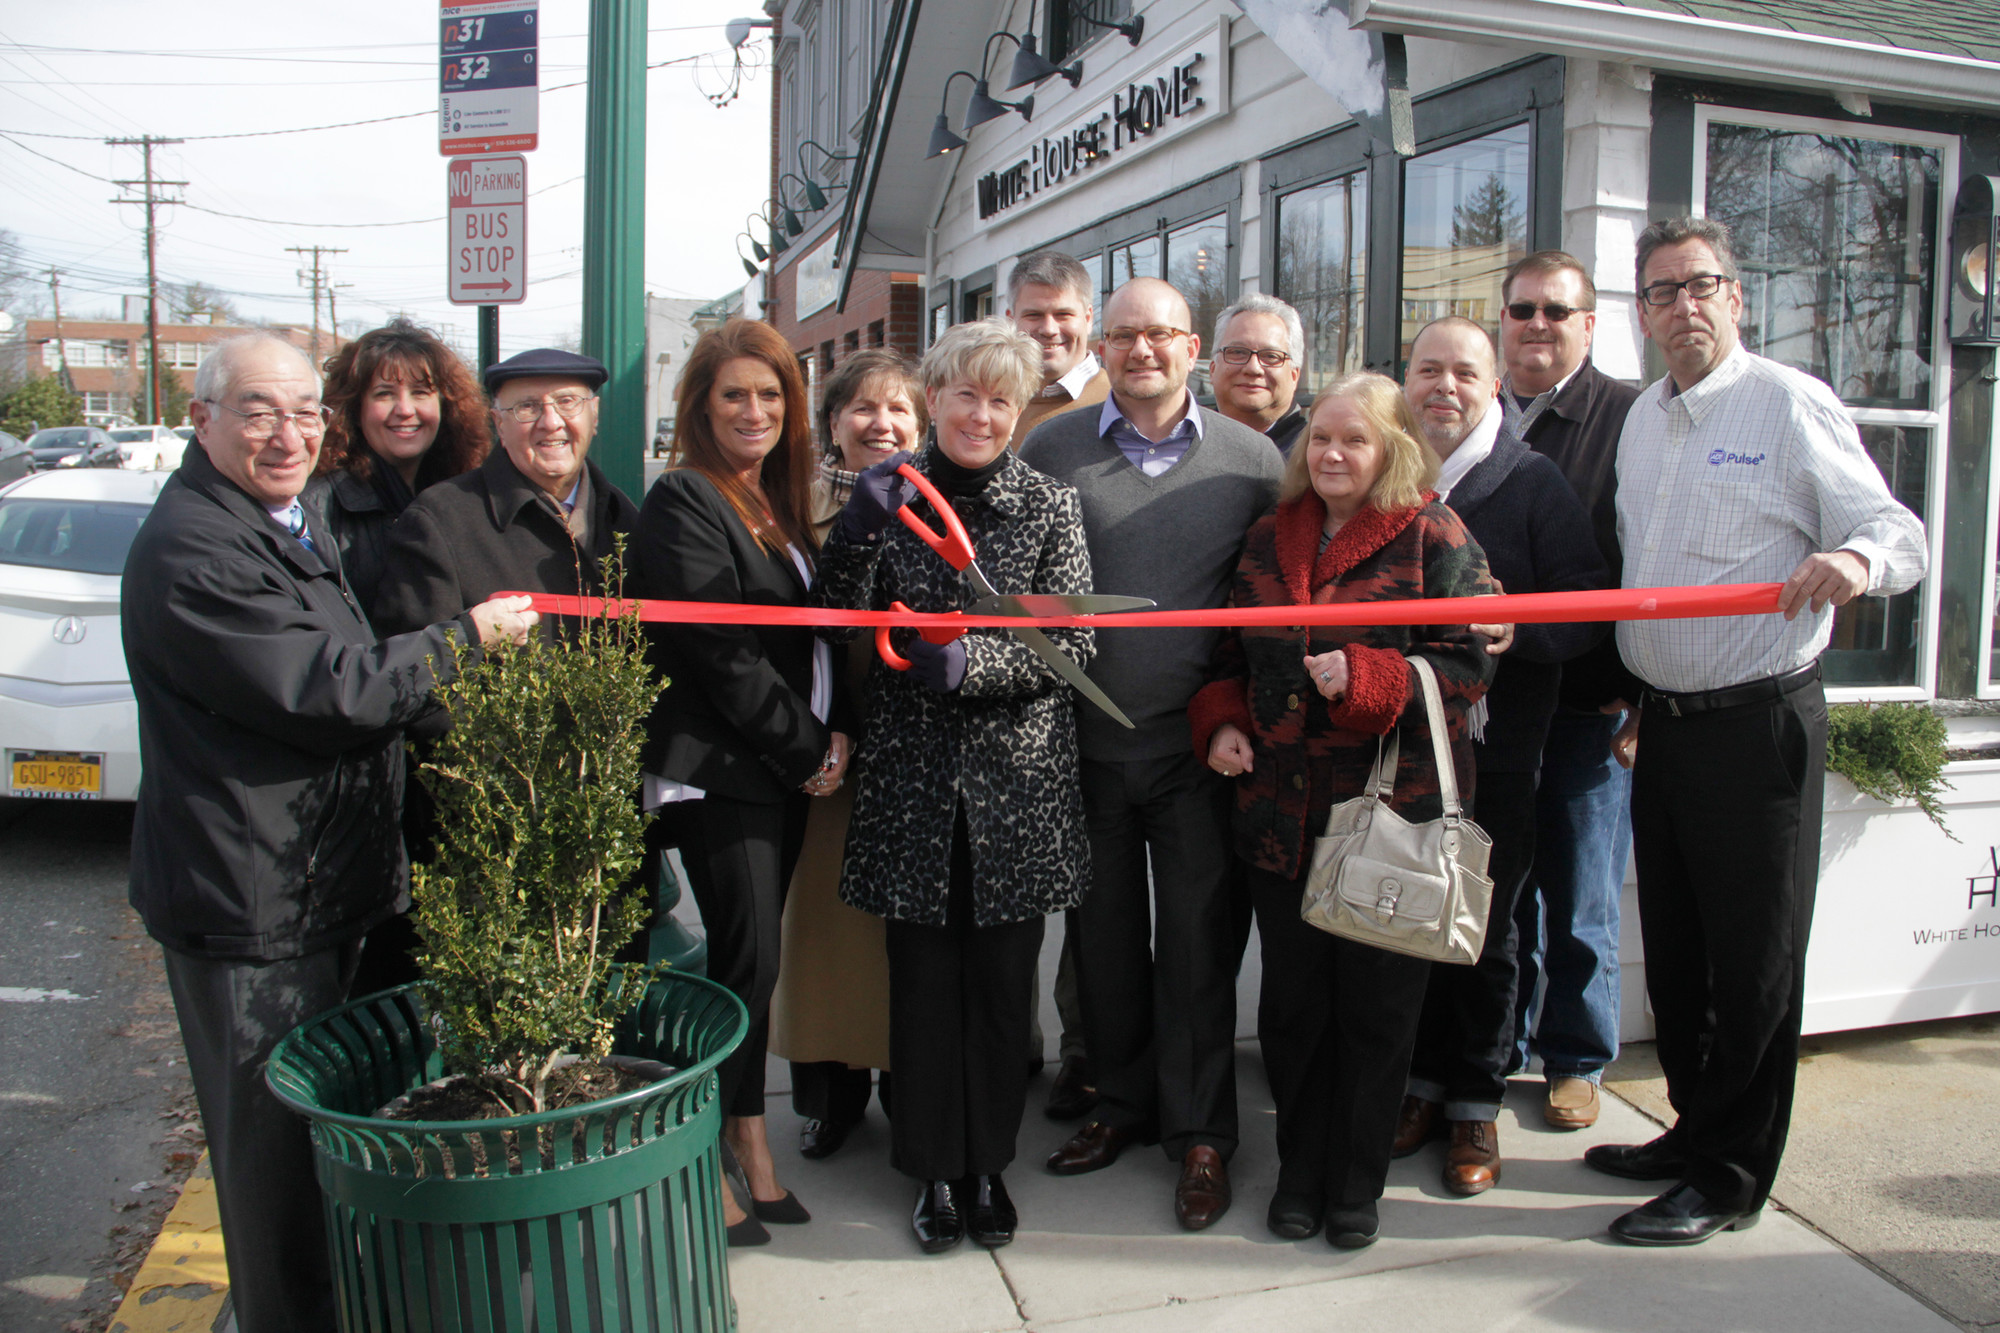 Officials throughout the village helped Joseph DeVito, 6th from right, cut the grand opening ribbon on his new store, White House Home.